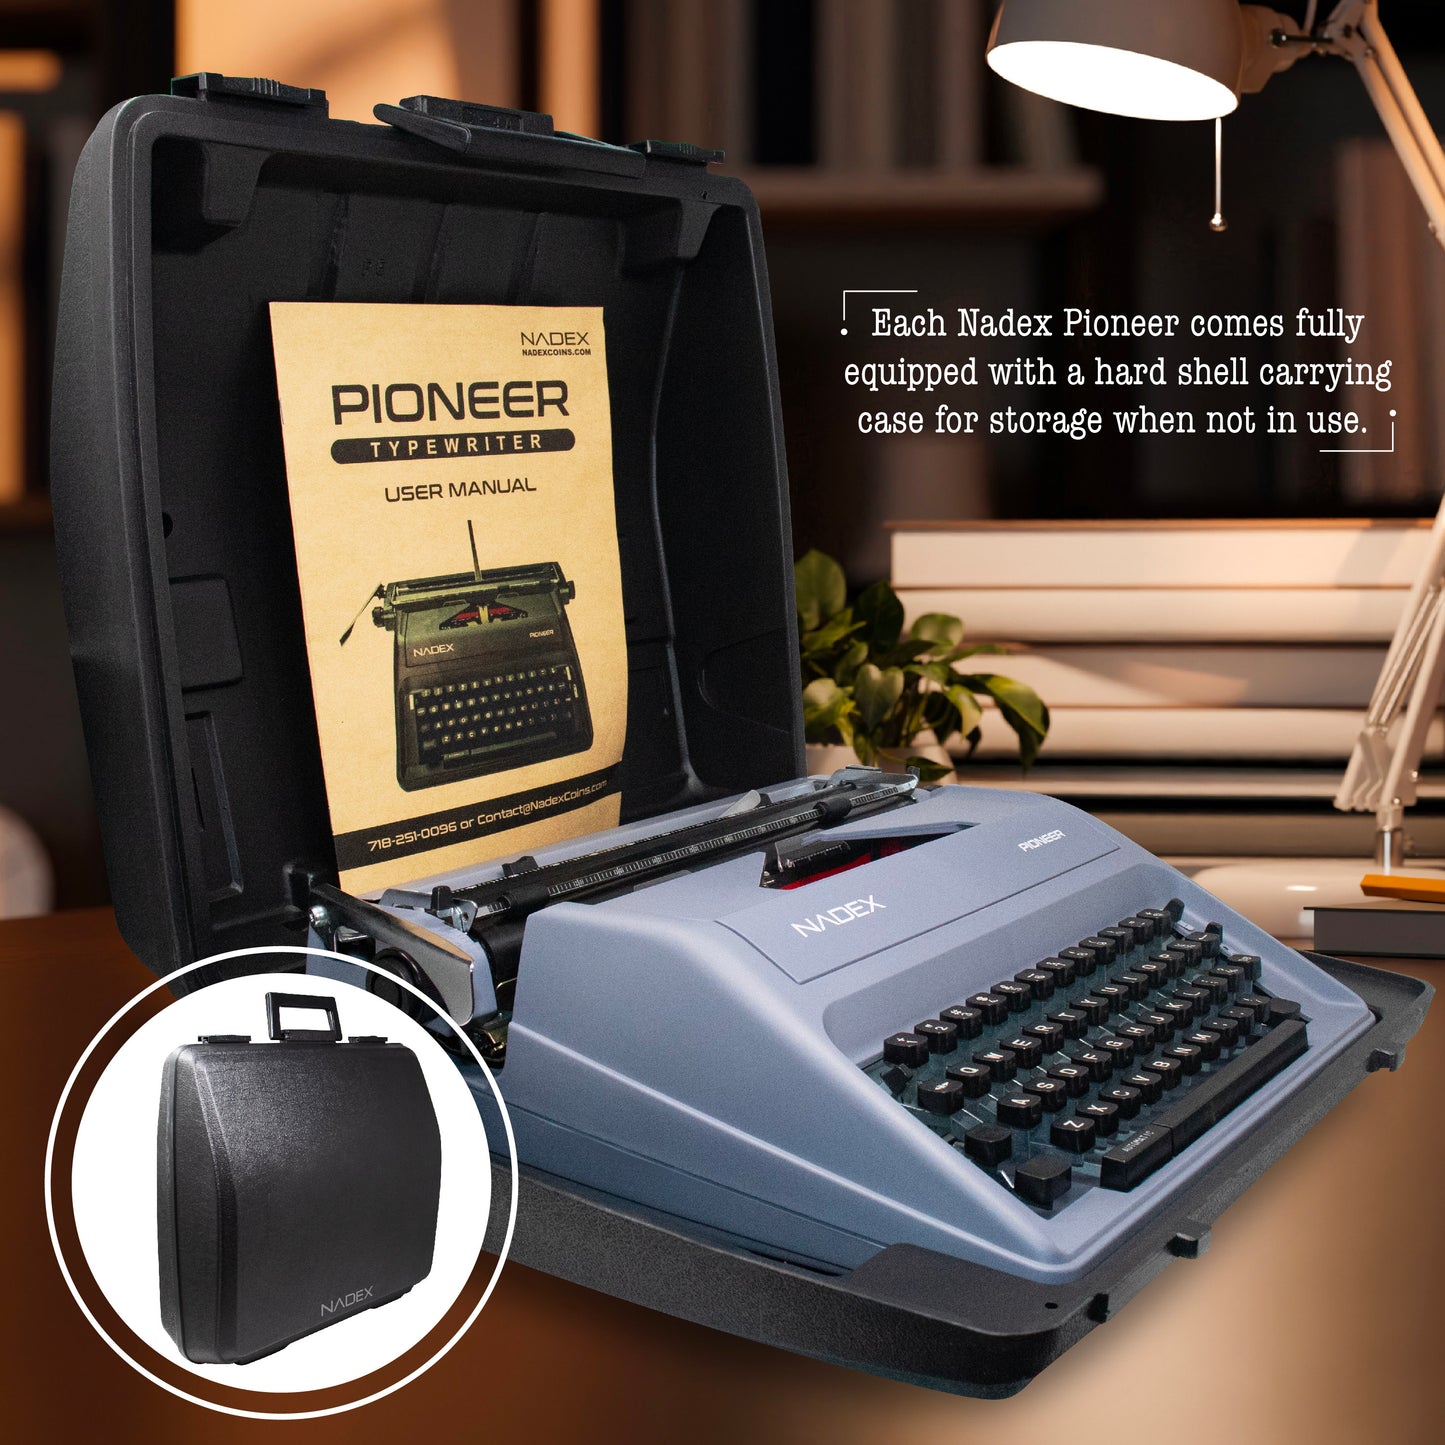 Nadex Pioneer Manual Typewriter, Durable Travel Case Included, Gray